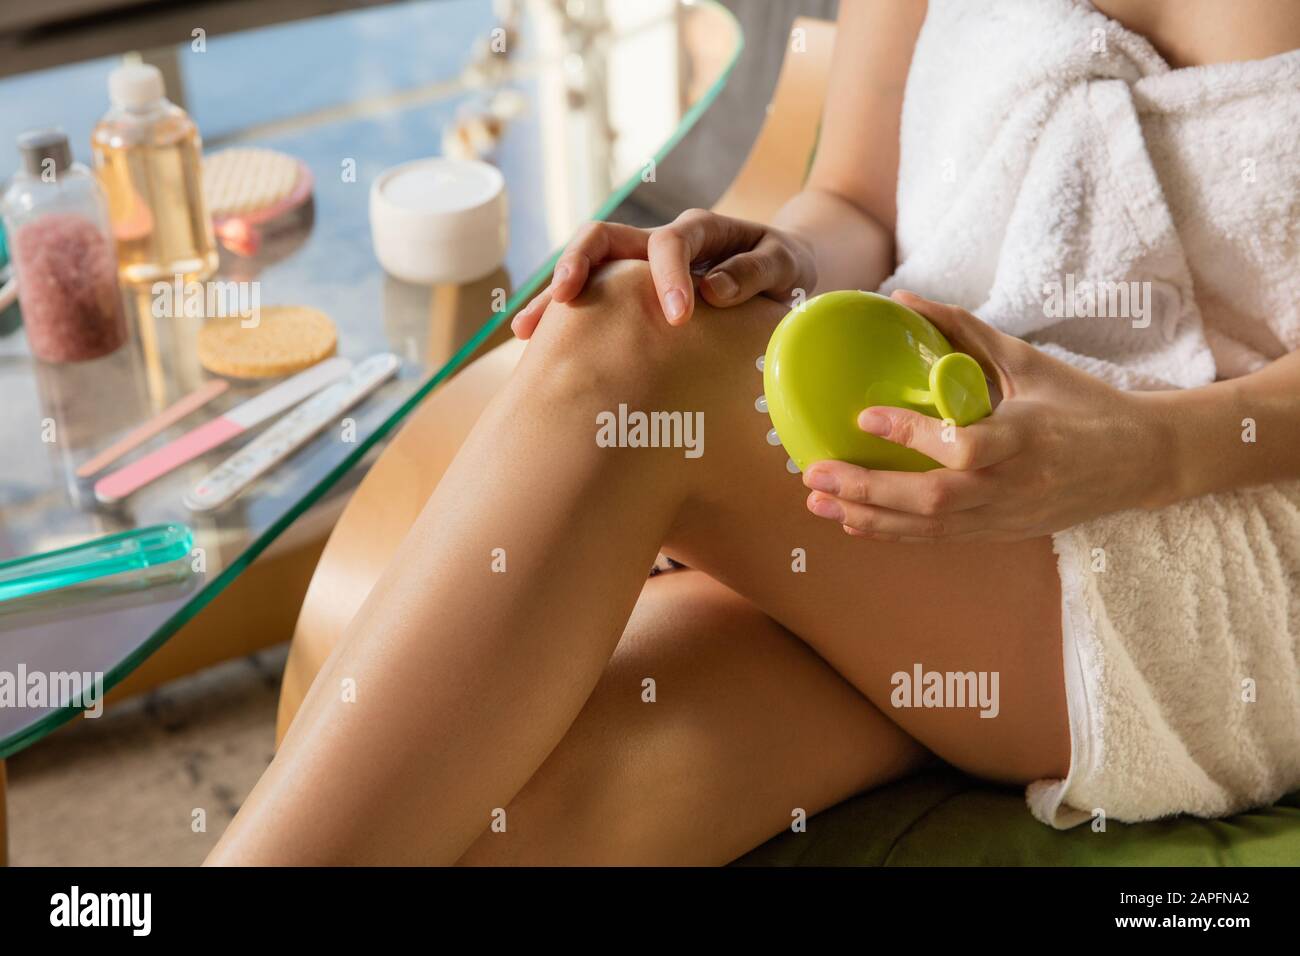 Beauty Day. Woman wearing towel doing her daily skincare routine at home.  Putting on moisturizing, doing anti-cellulite, lymphatic drainage massage.  Concept of beauty, self-care, cosmetics, youth Stock Photo - Alamy